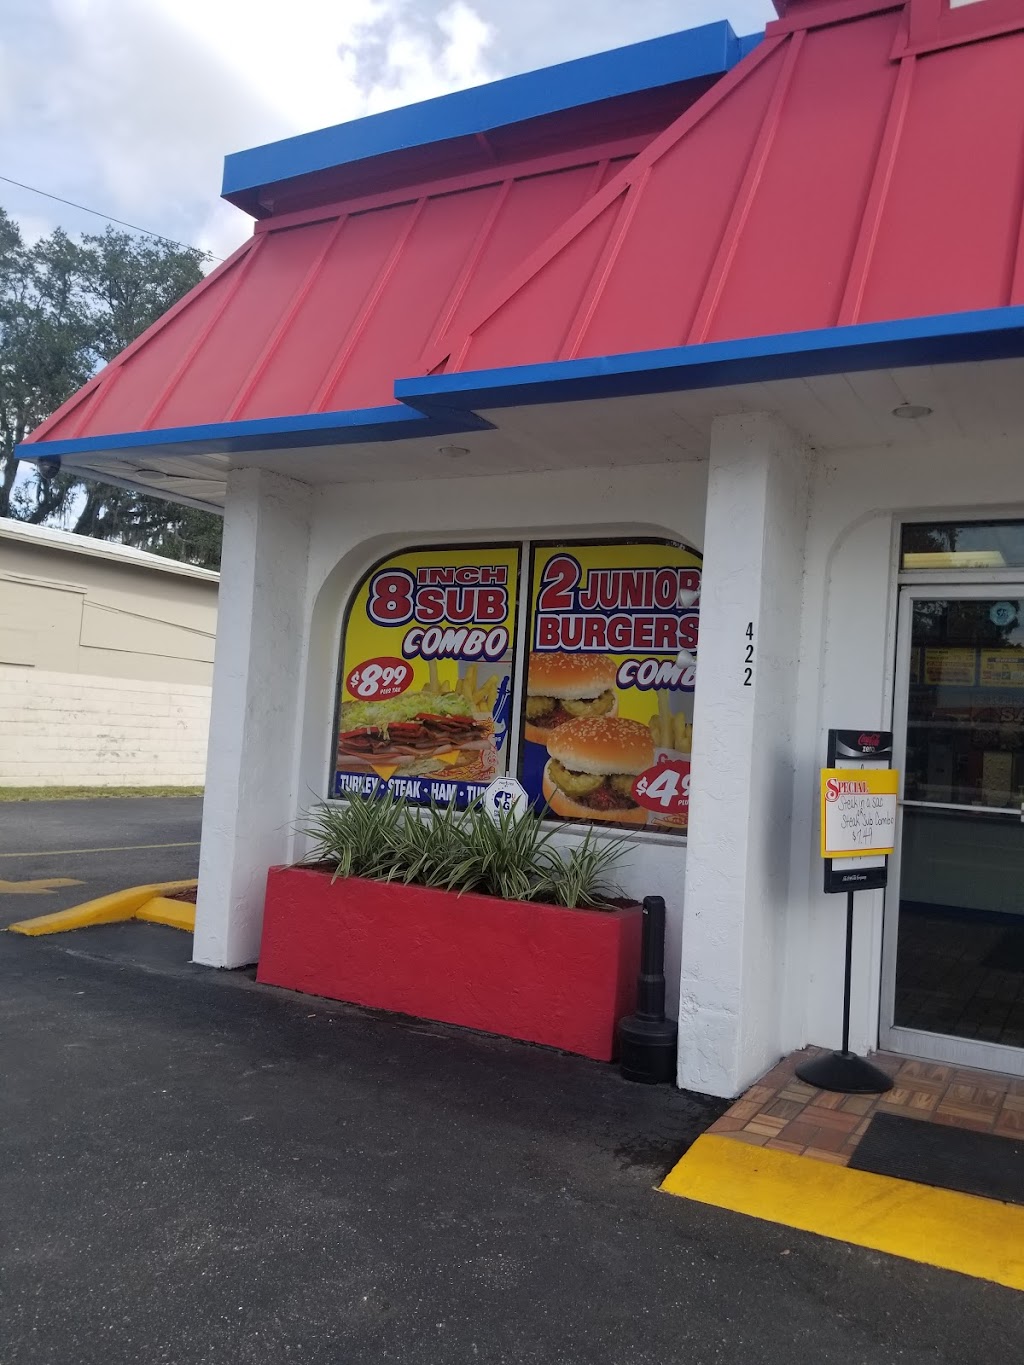 The Sheik Sandwiches and Subs | 422 S Orange Ave, Green Cove Springs, FL 32043, USA | Phone: (904) 531-5460